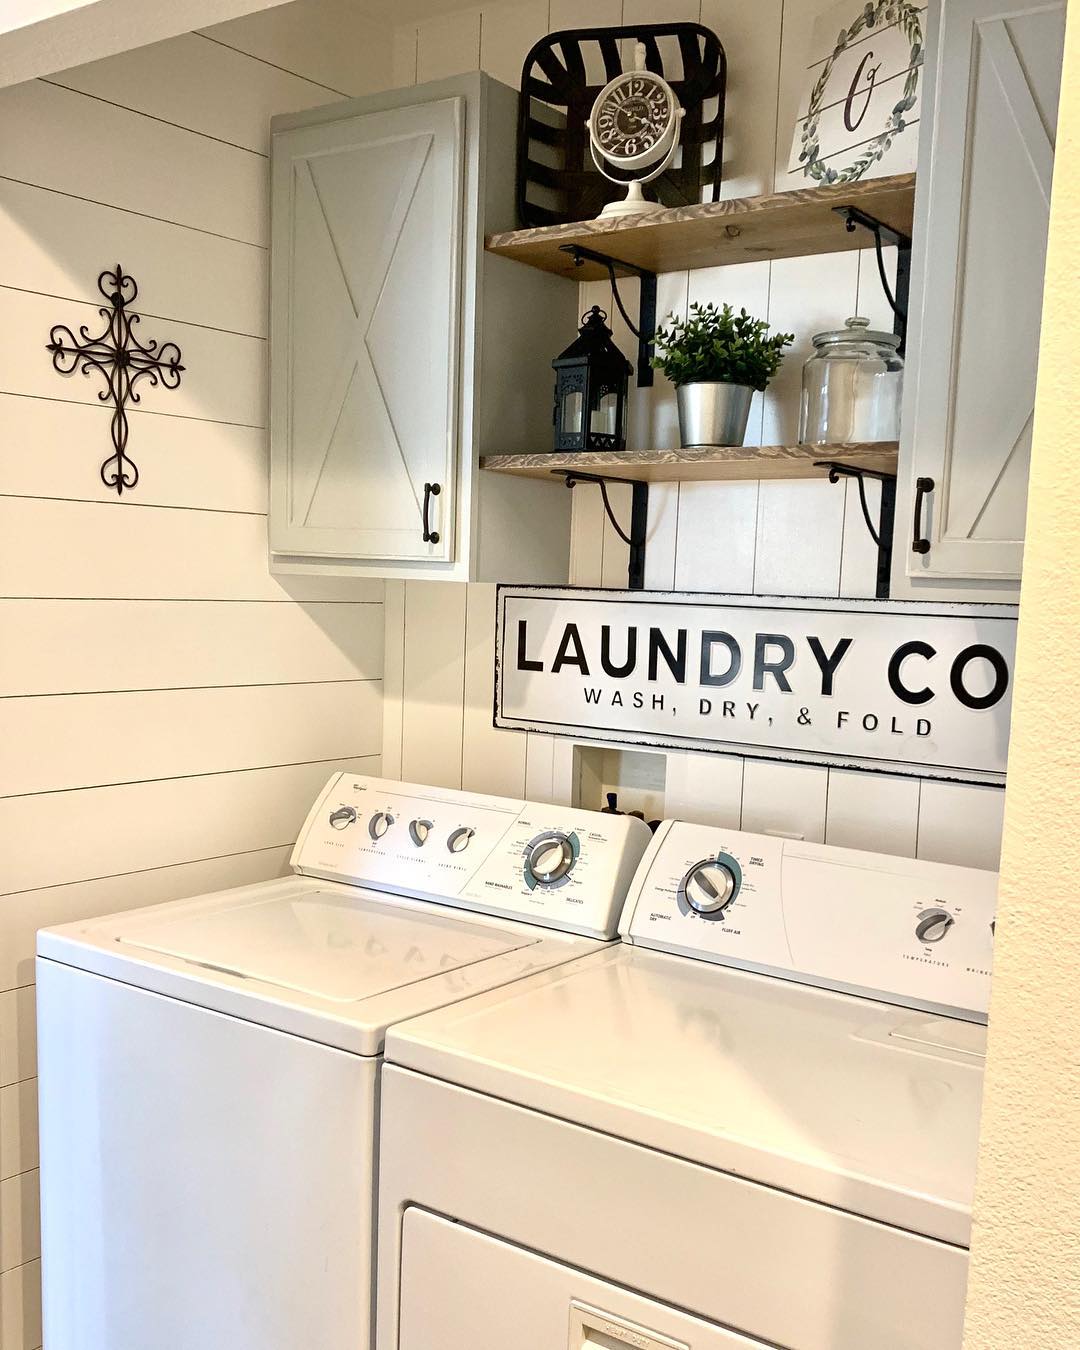  Incorporate Decorative Elements in a Shiplap Laundry Room